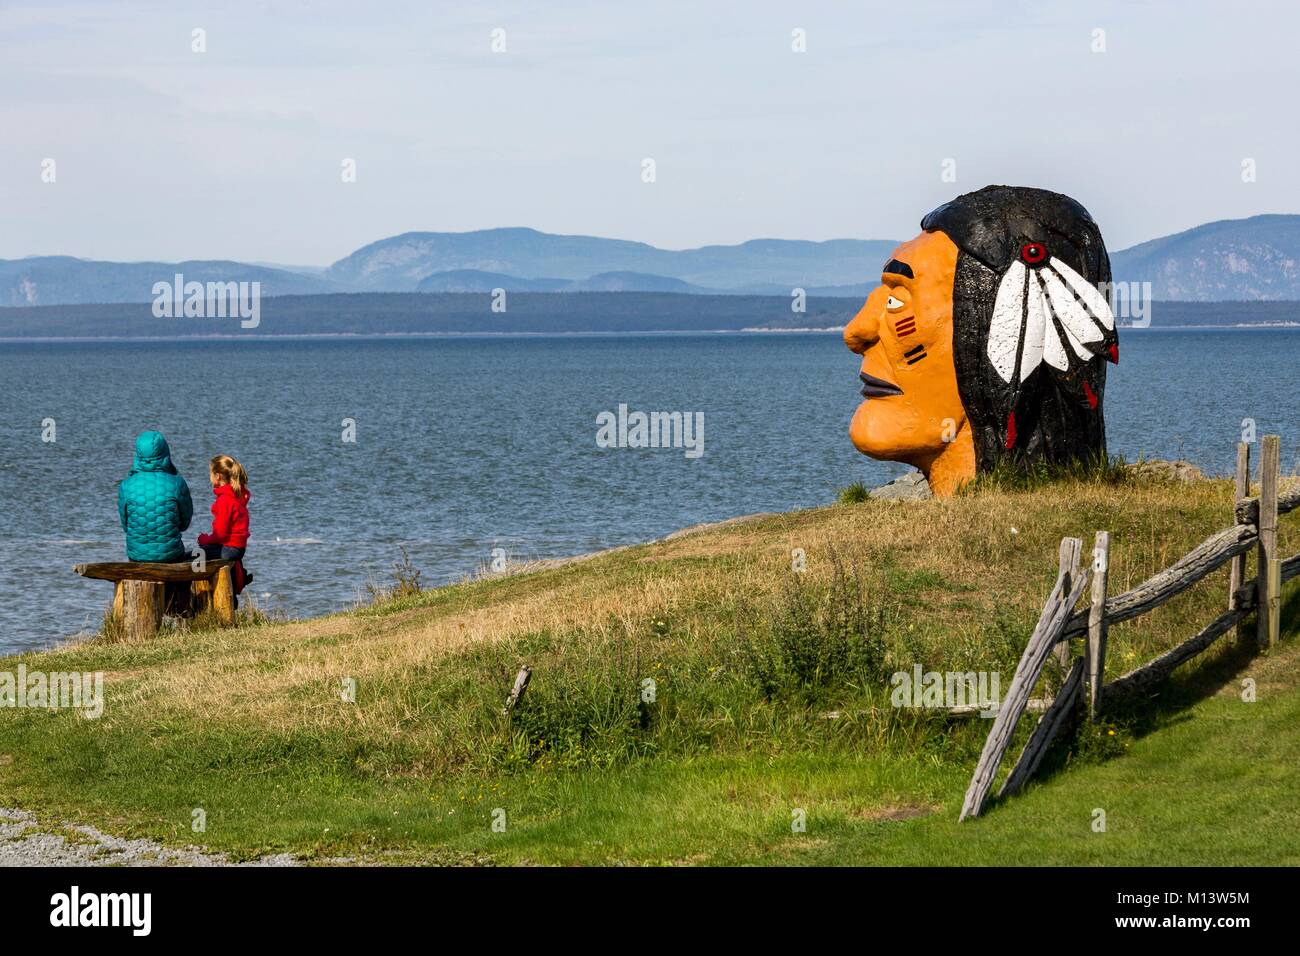 Canada, Province of Quebec, Bas-Saint-Laurent region, Rivière-du-Loup, the harbor, craft kiosk, Native American head facing the St. Lawrence River and children Stock Photo